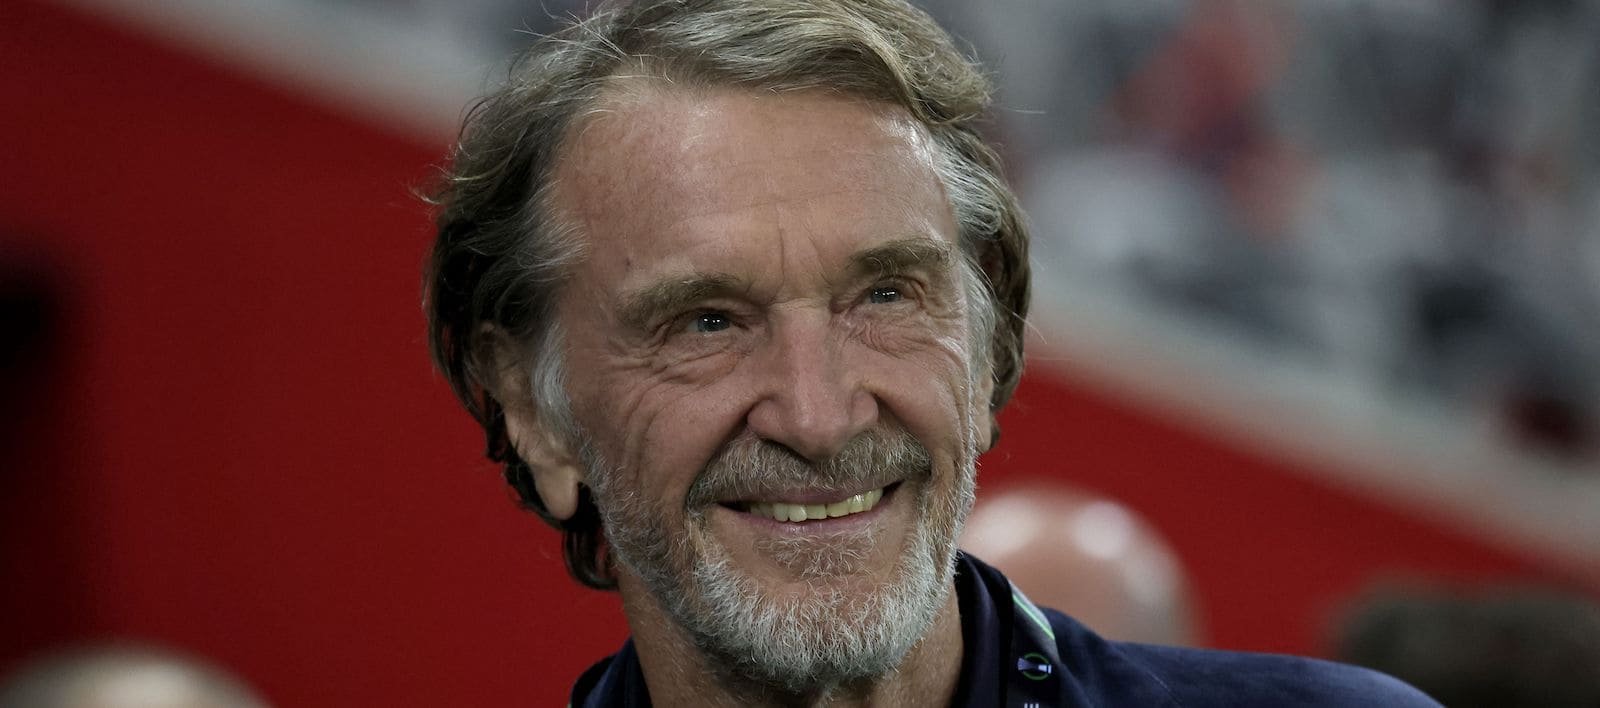 Sir Jim Ratcliffe’s additional investment lifts Manchester United out of FFP purgatory – Man United News And Transfer News